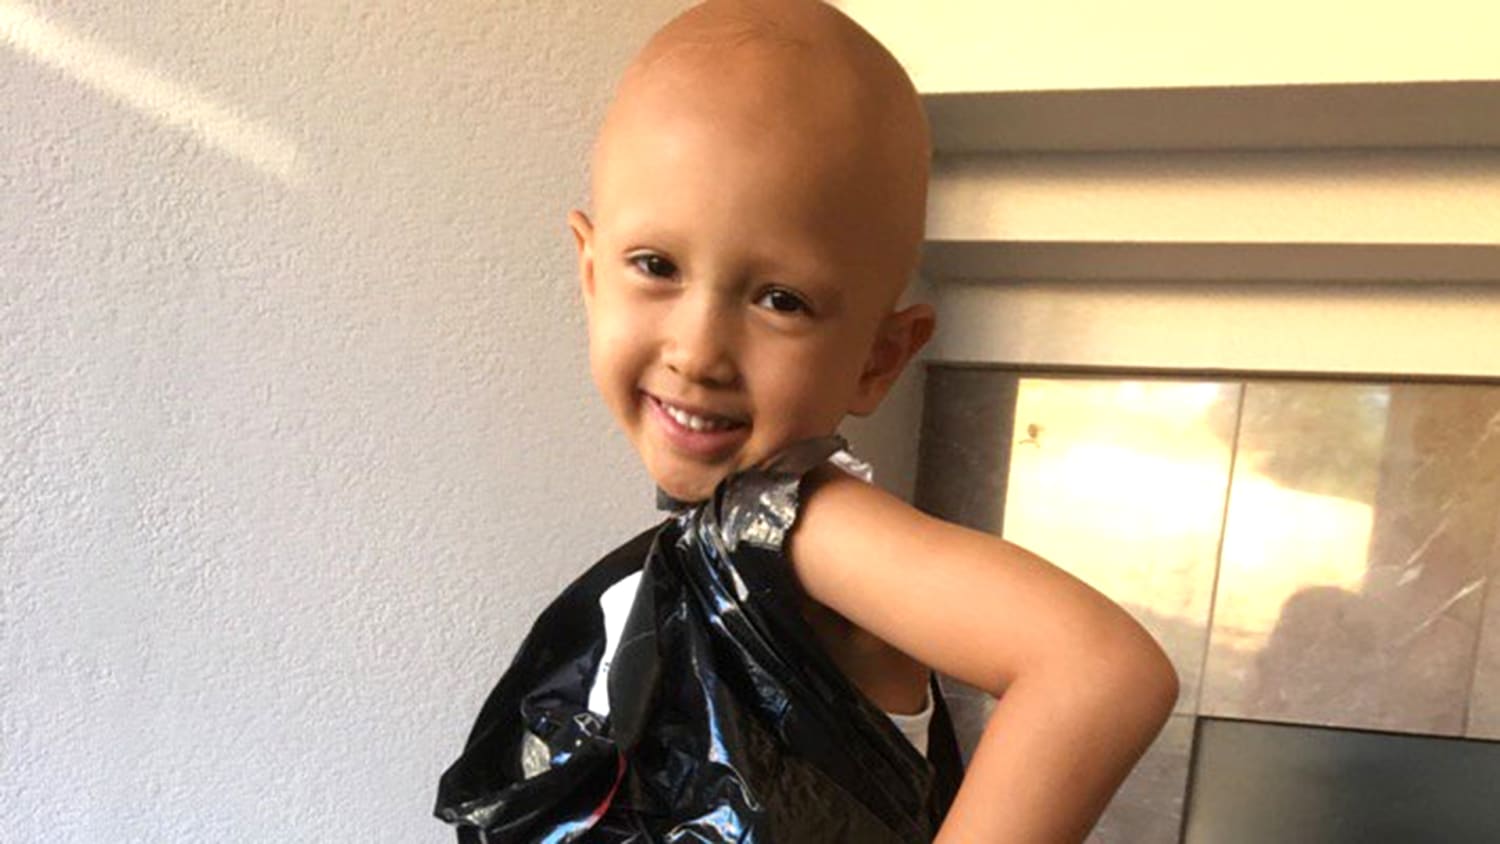 Meet the 4-year-old fashion designer with alopecia who's making